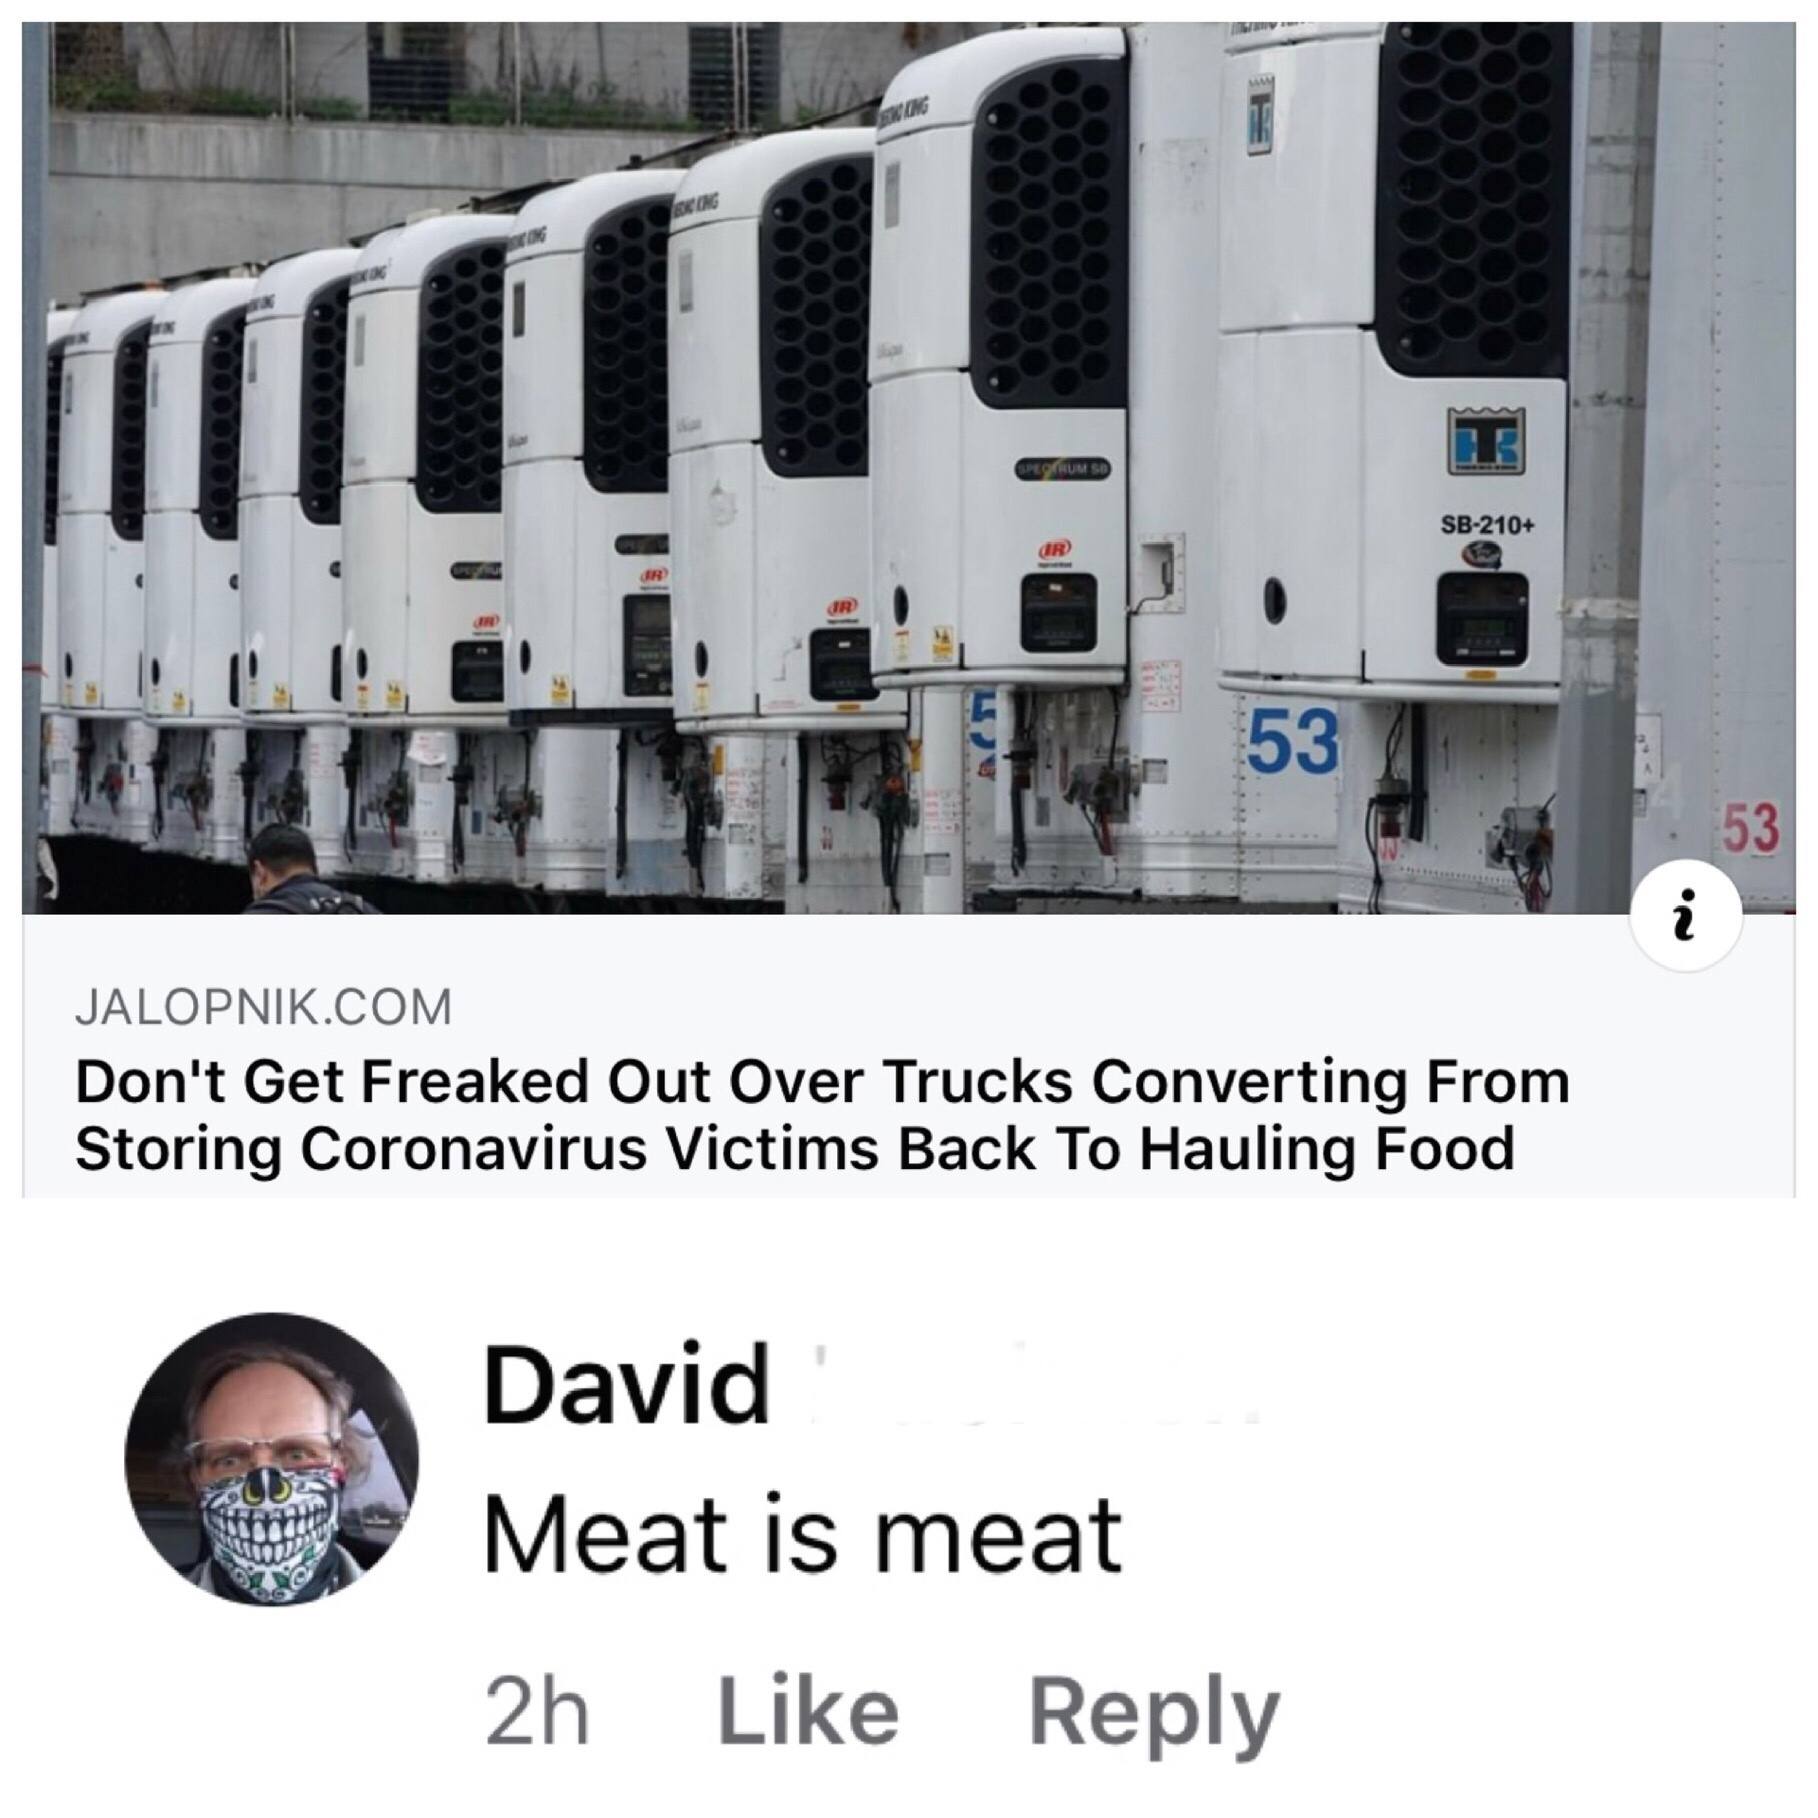 machine - Sb210 53 53 Jalopnik.Com Don't Get Freaked Out Over Trucks Converting From Storing Coronavirus Victims Back To Hauling Food David Meat is meat 2h